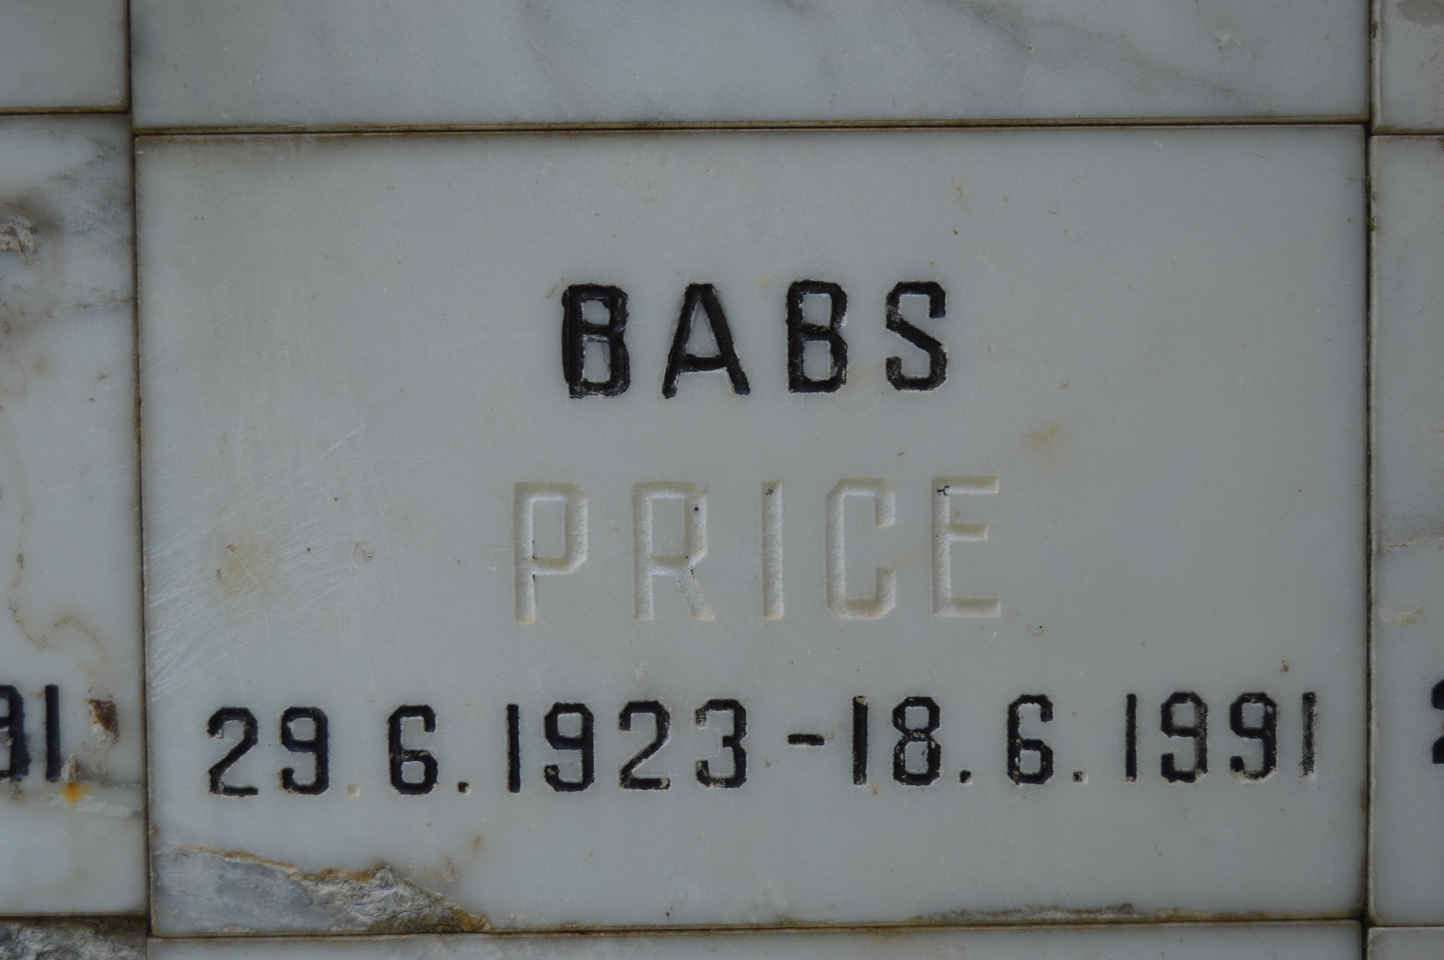 PRICE Babs 1923-1991